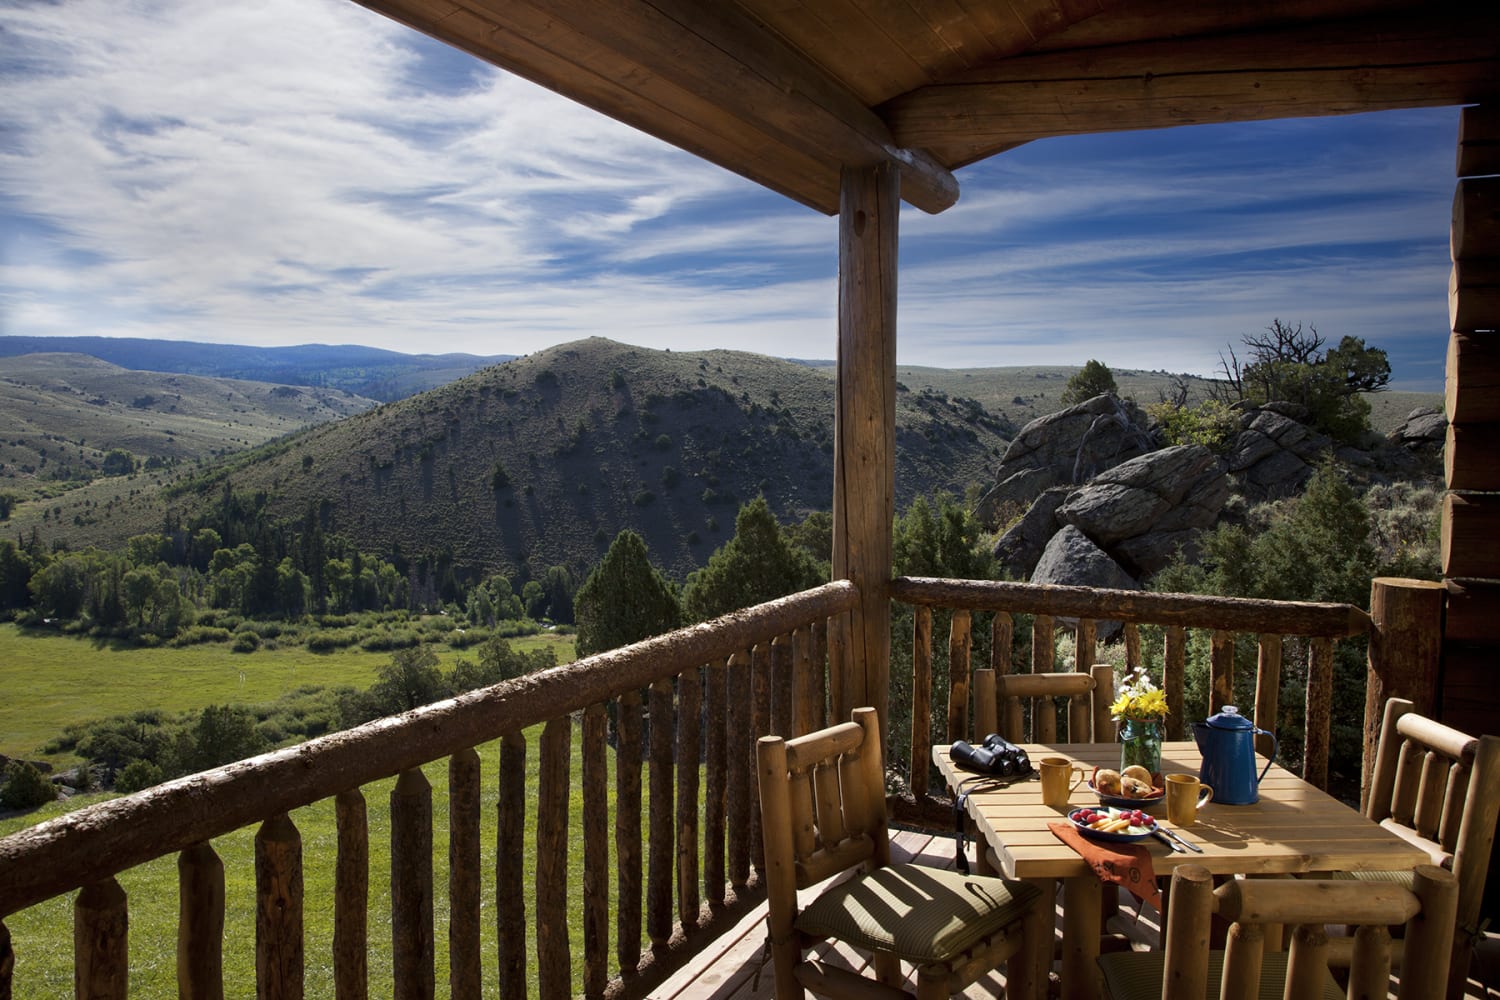 10 of the best romantic getaways in the United States